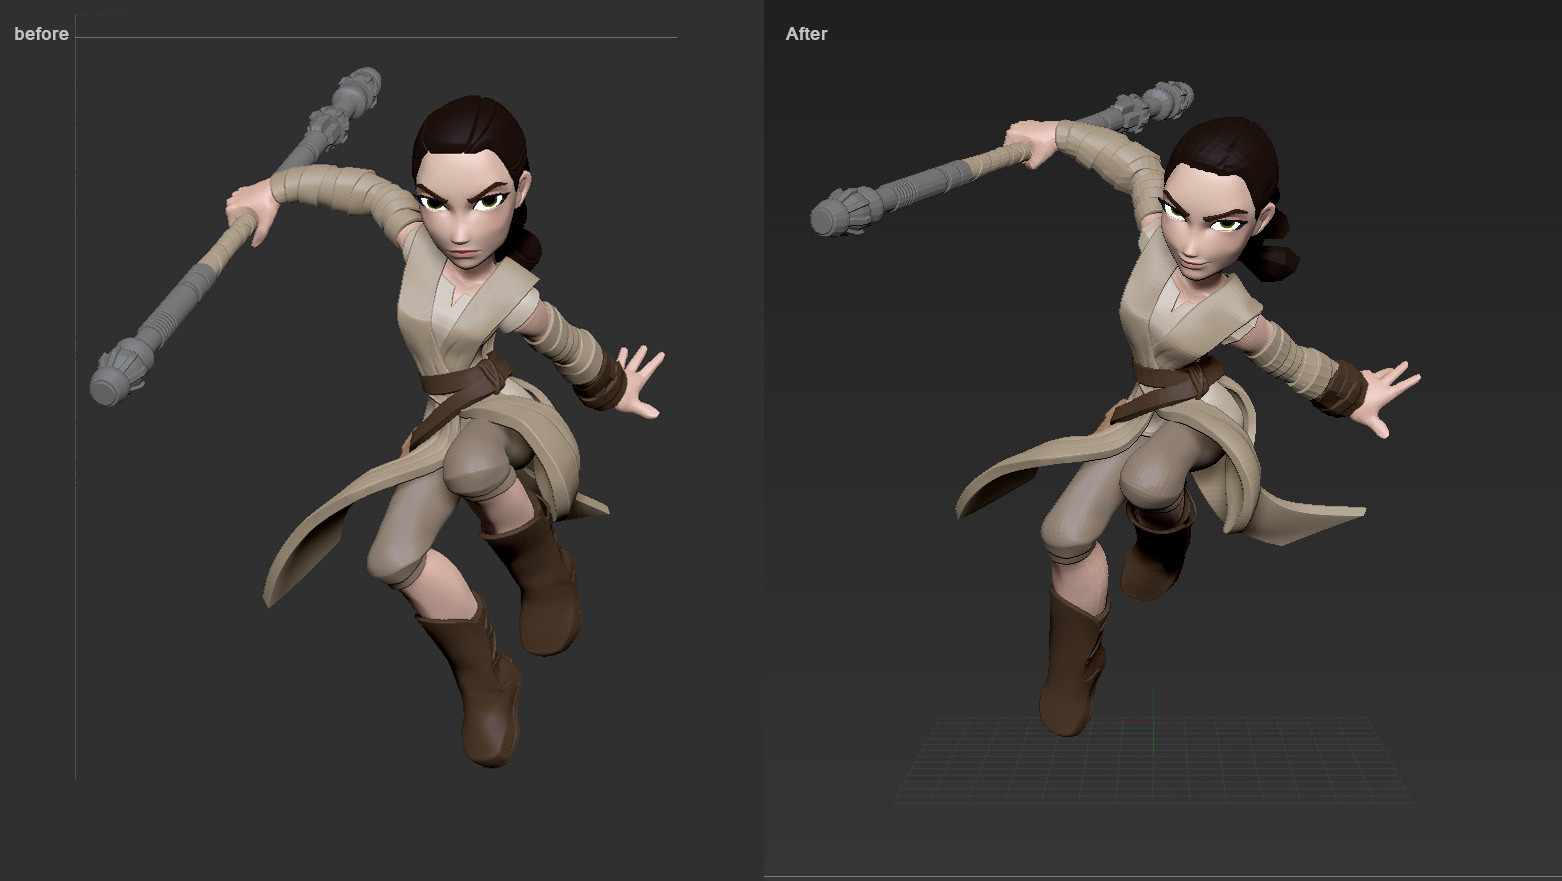 Left - Outsourced Zbrush pose, Right - Adjustments I made in Zbrush